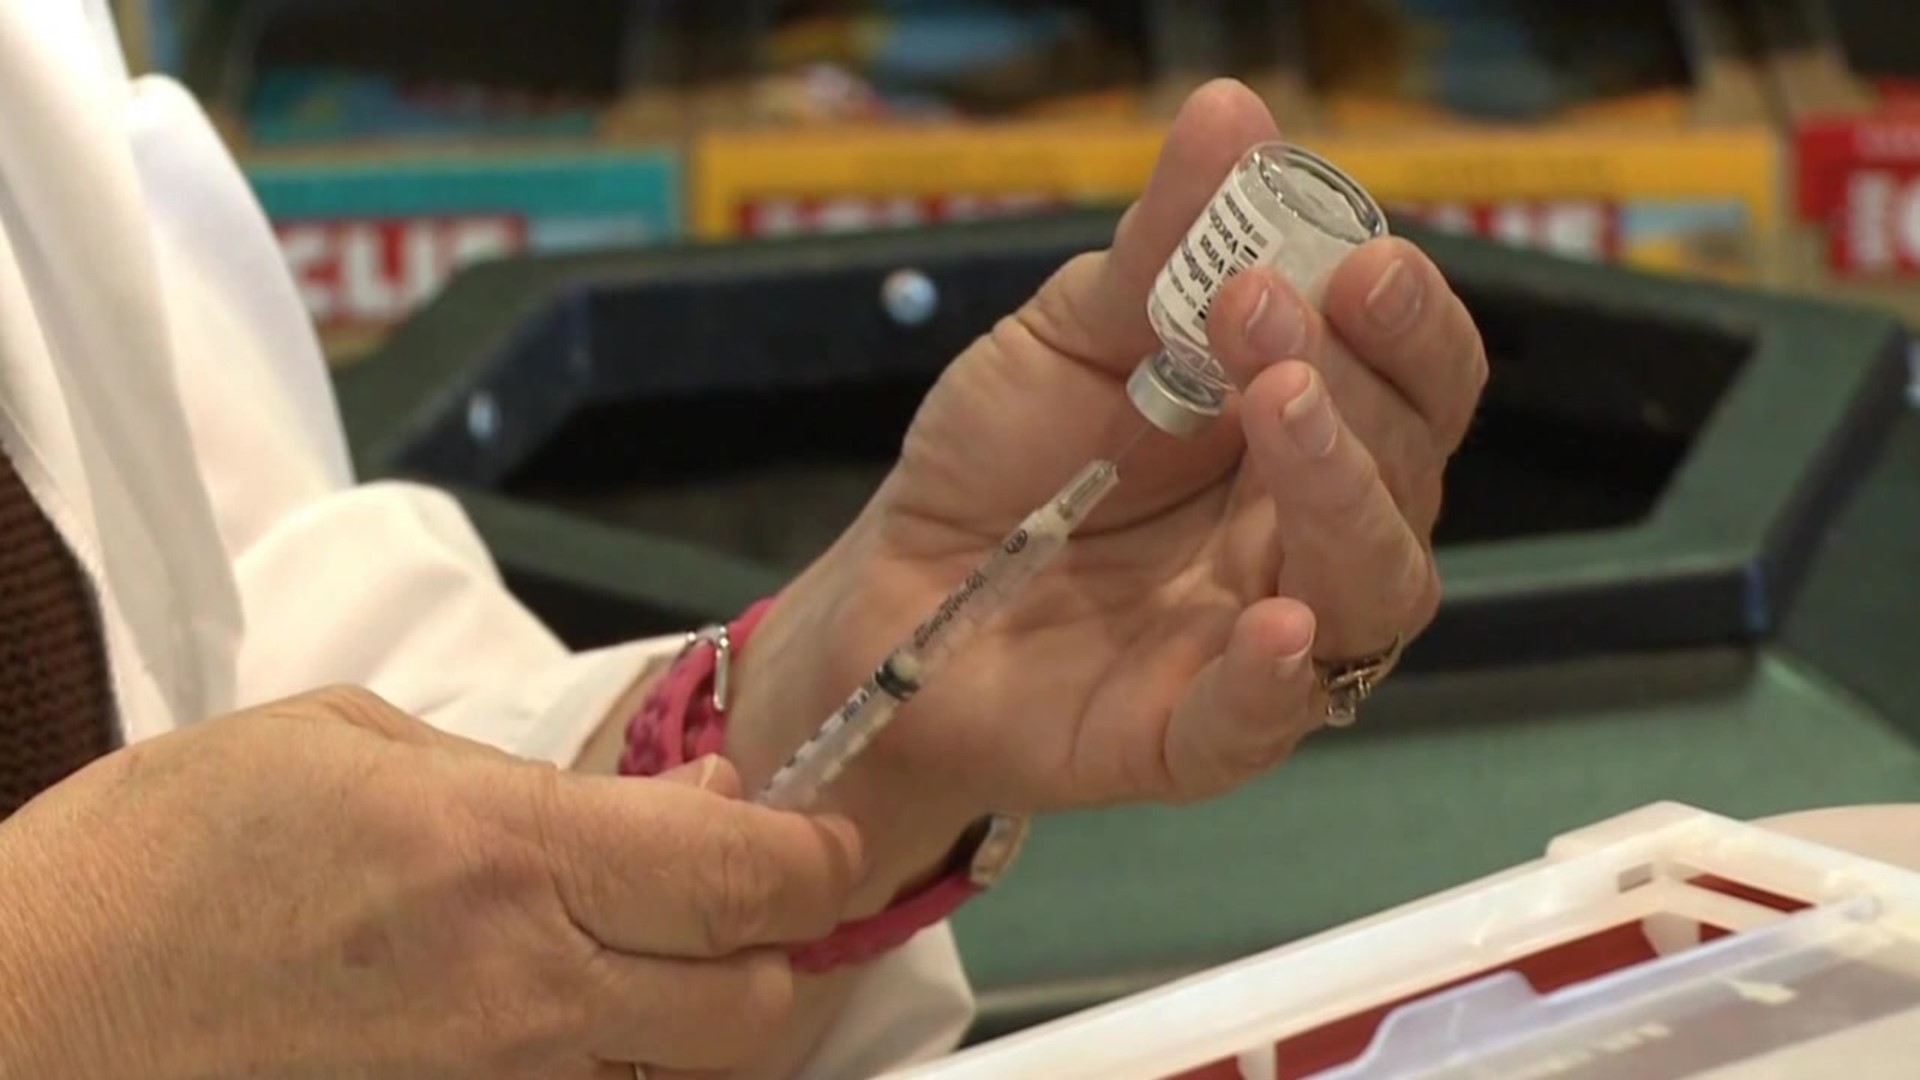 How experts say you can make things easier when they have to get immunized